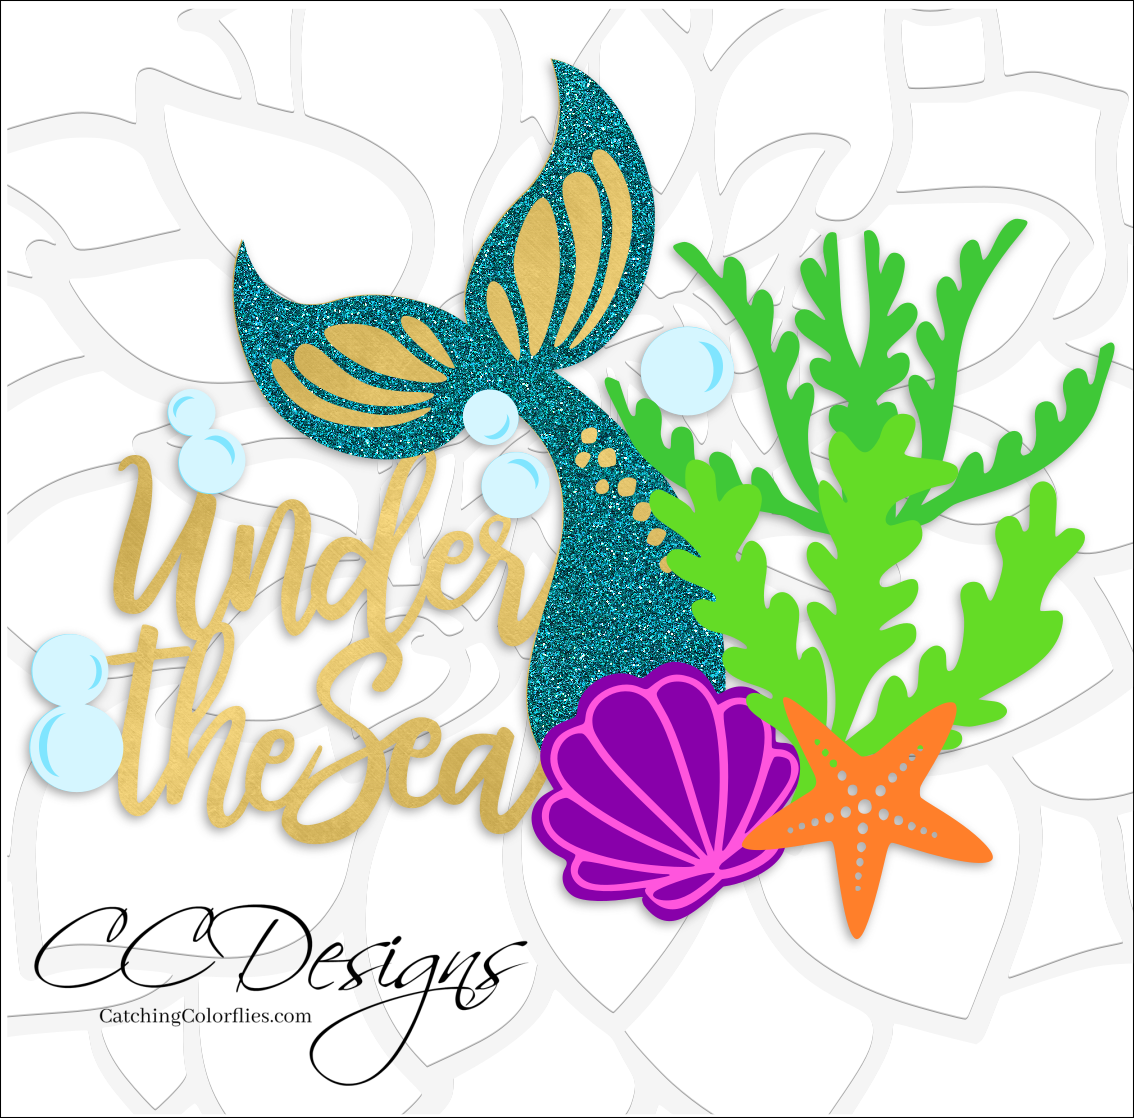 The two-layered Cricut "Under the Sea" cake topper with a mermaid tail and sea elements lays on a white background. CC Designs logo is in the lower left corner. 